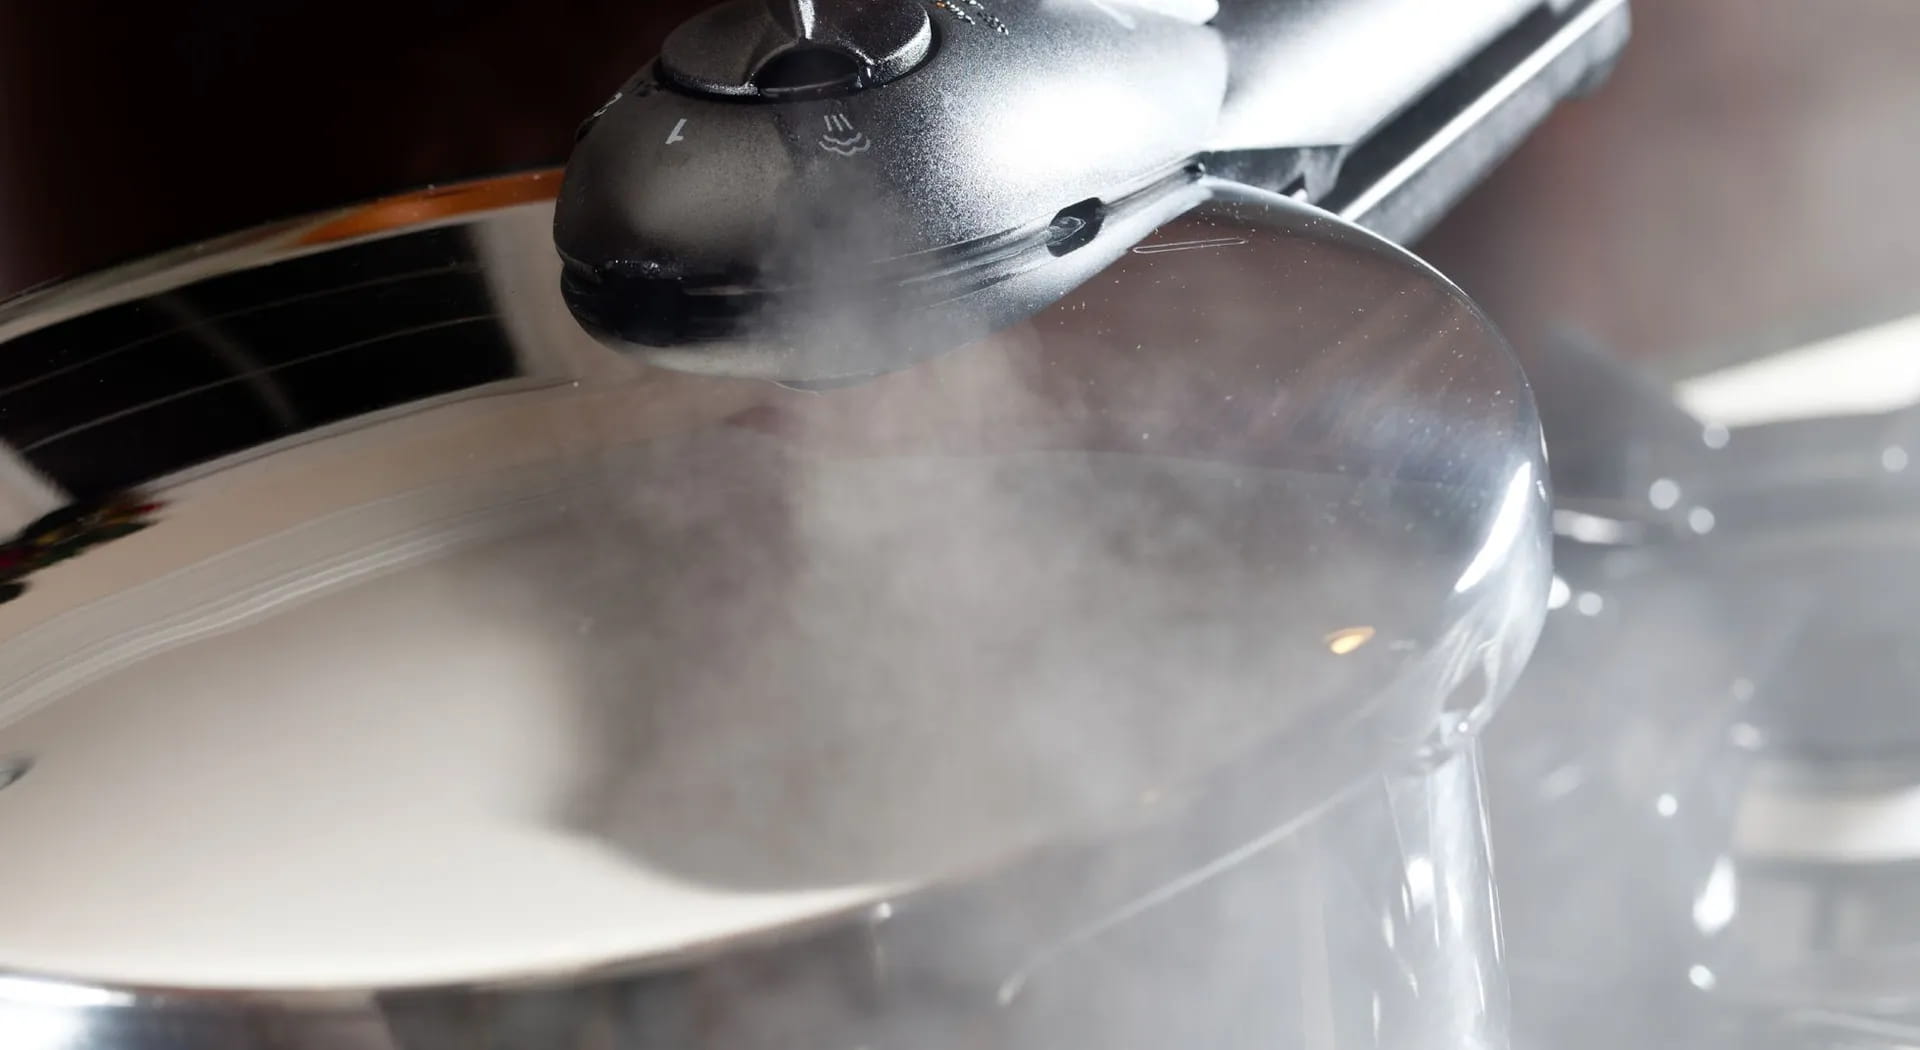 Cooking with a pressure cooker: here are the tricks